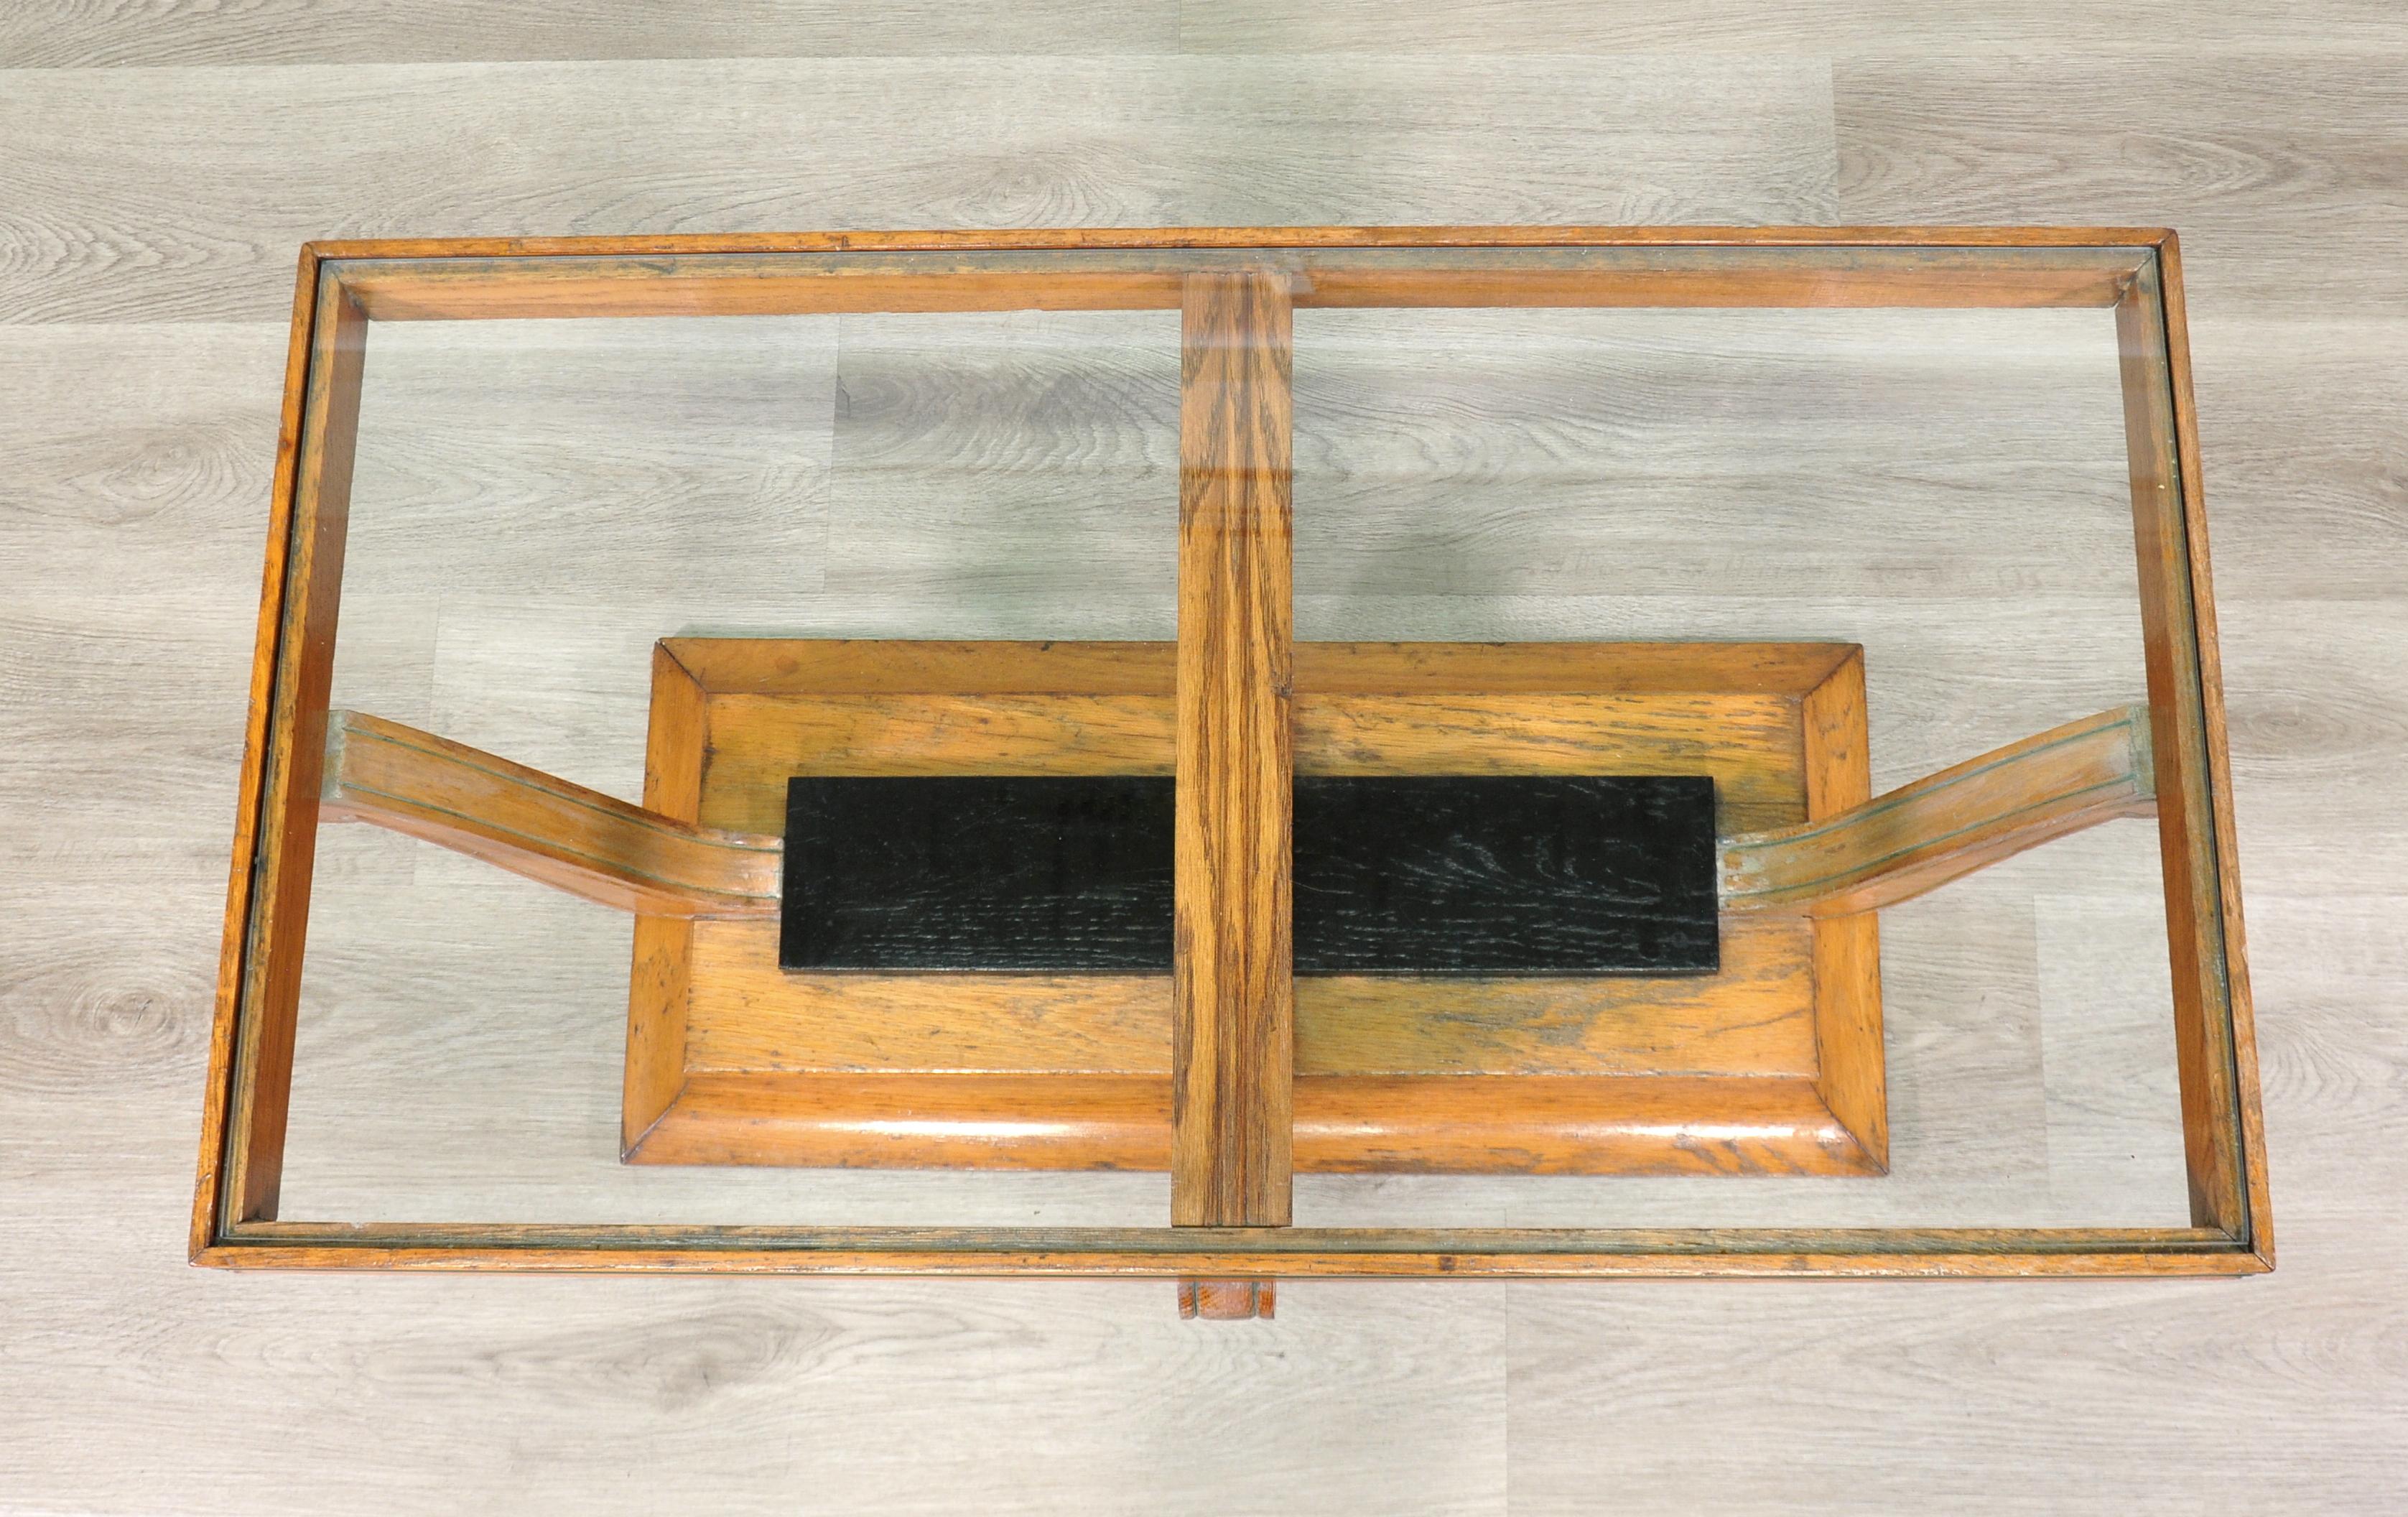 Ebonized Art Deco Sculptural Wood and Glass Coffee Table For Sale